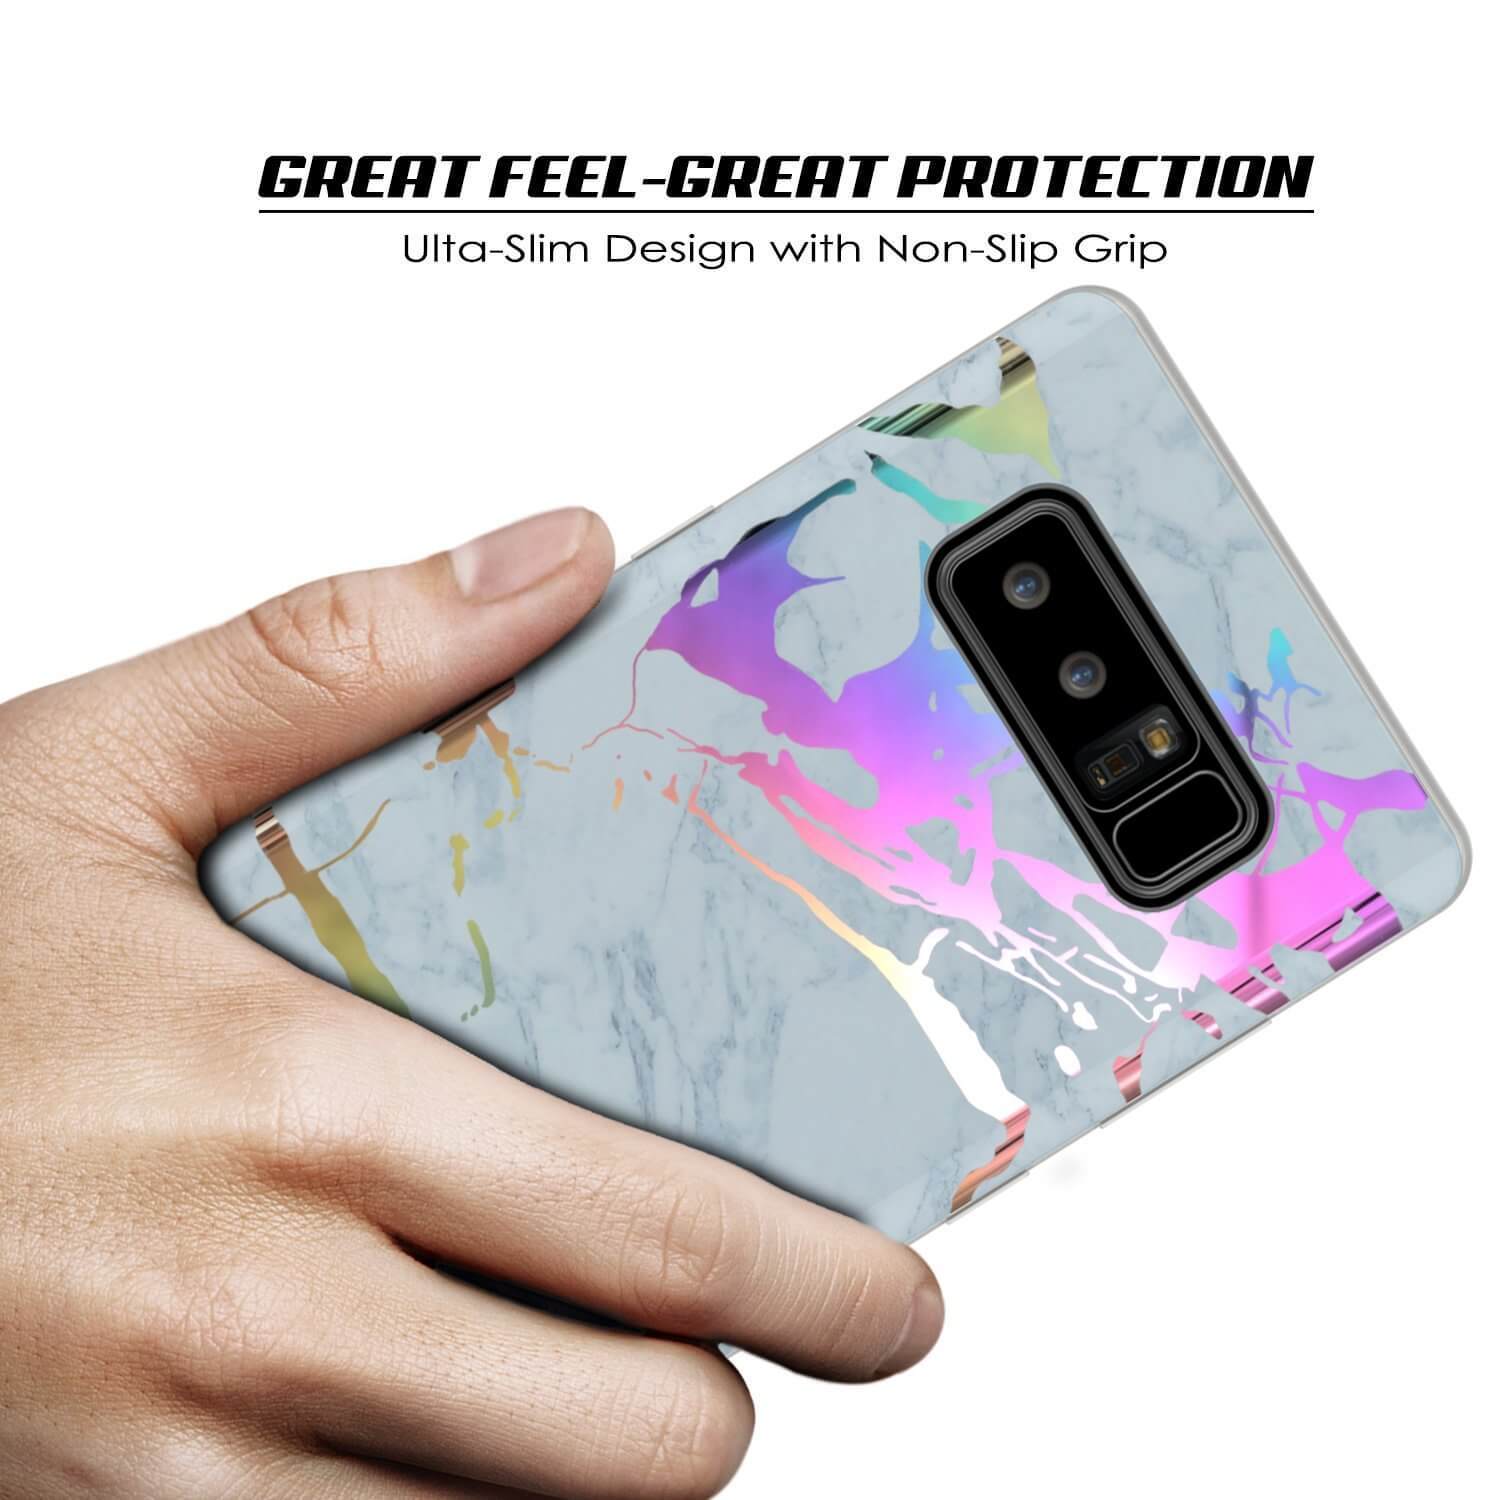 Galaxy Note 8 Marble Case, Protective Full Body Cover [BLUE MARMO]